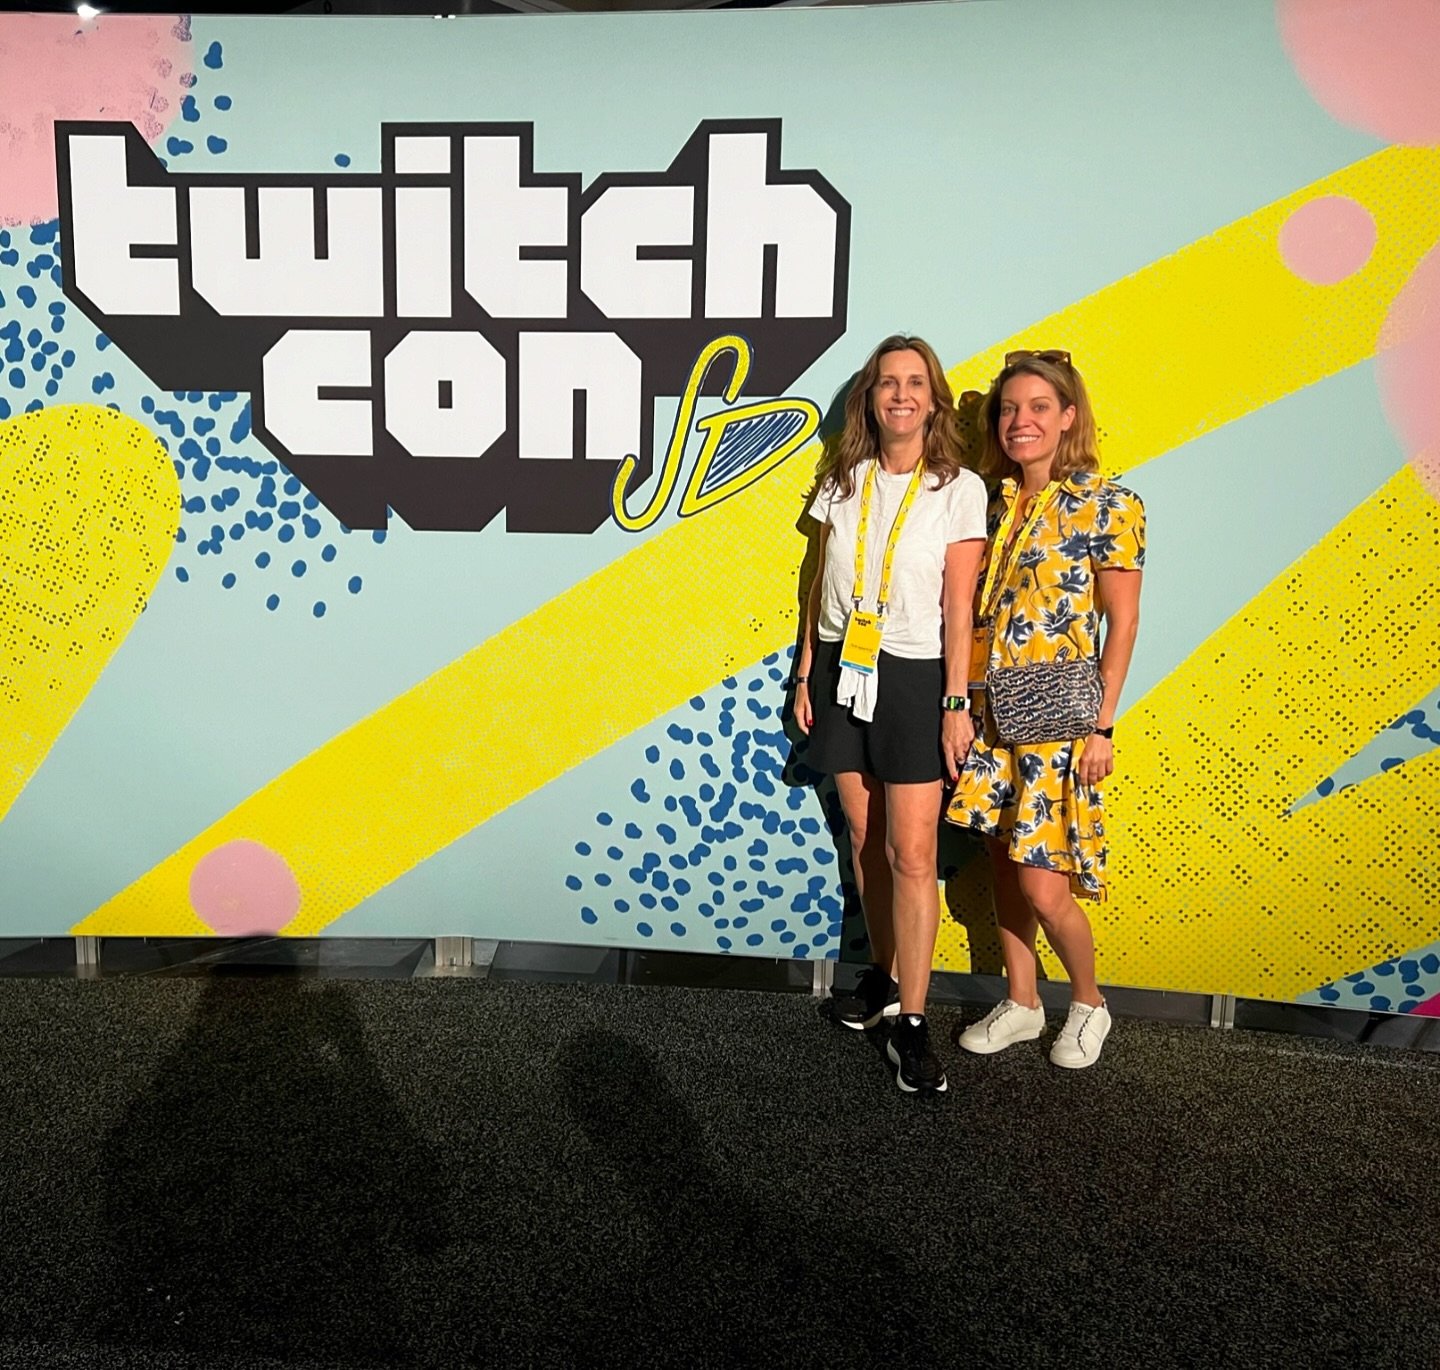 We are thrilled to announce our partnership with Twitch Con San Diego to handle all exterior branding for the upcoming conference!

If you&rsquo;ve been eager to showcase your brand in a remarkable way to a vast audience, this is the perfect opportun